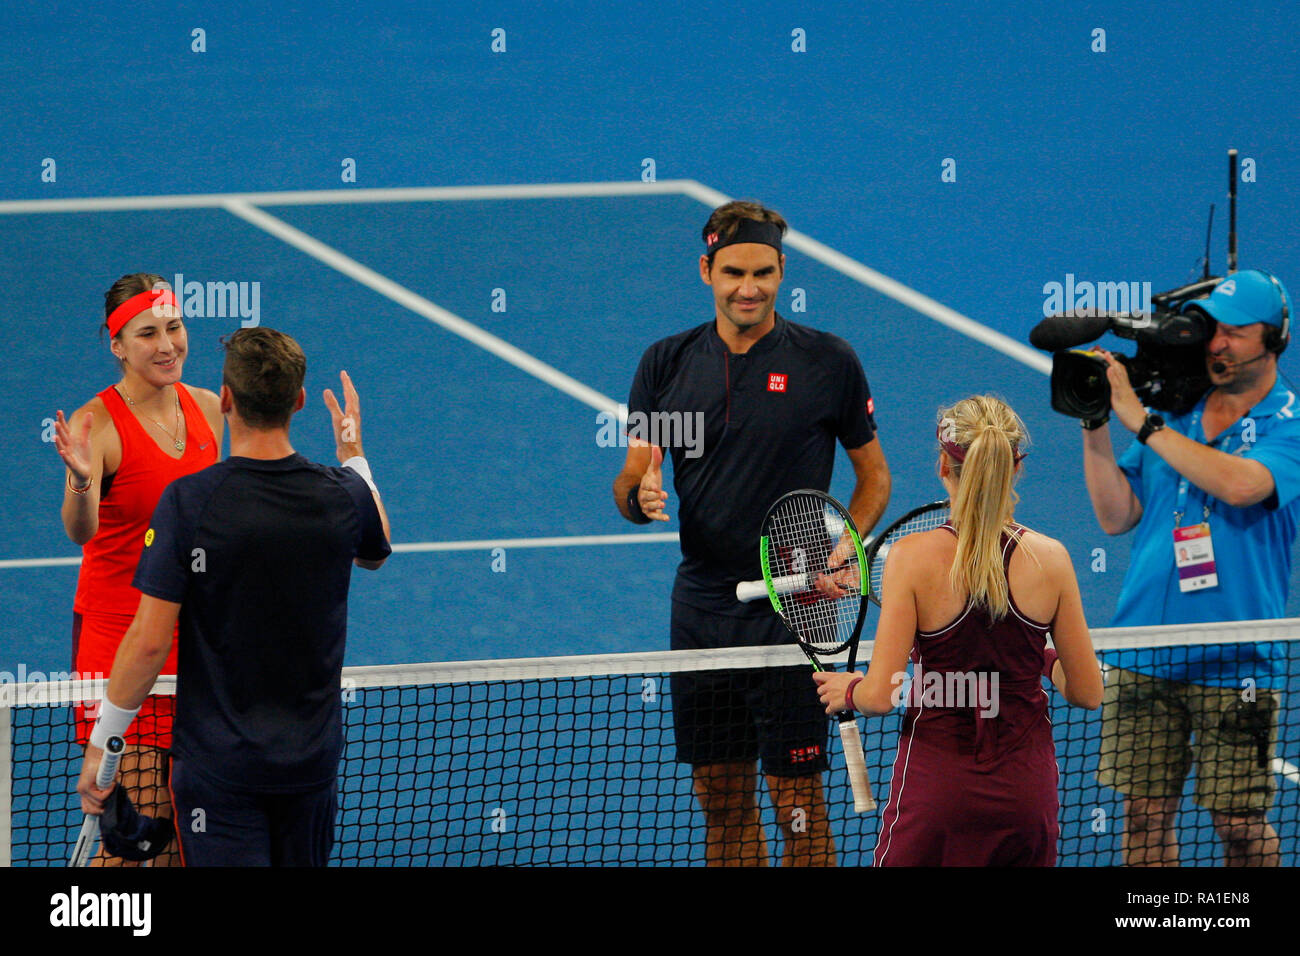 RAC Arena, Perth, Australia. 30th Dec, 2018. Hopman Cup Tennis, sponsored  by Mastercard; Cameron Norrie and Katie Boulter of Team Britain  congratulate Roger Federer and Belinda Bencic of Team Switzerland after they